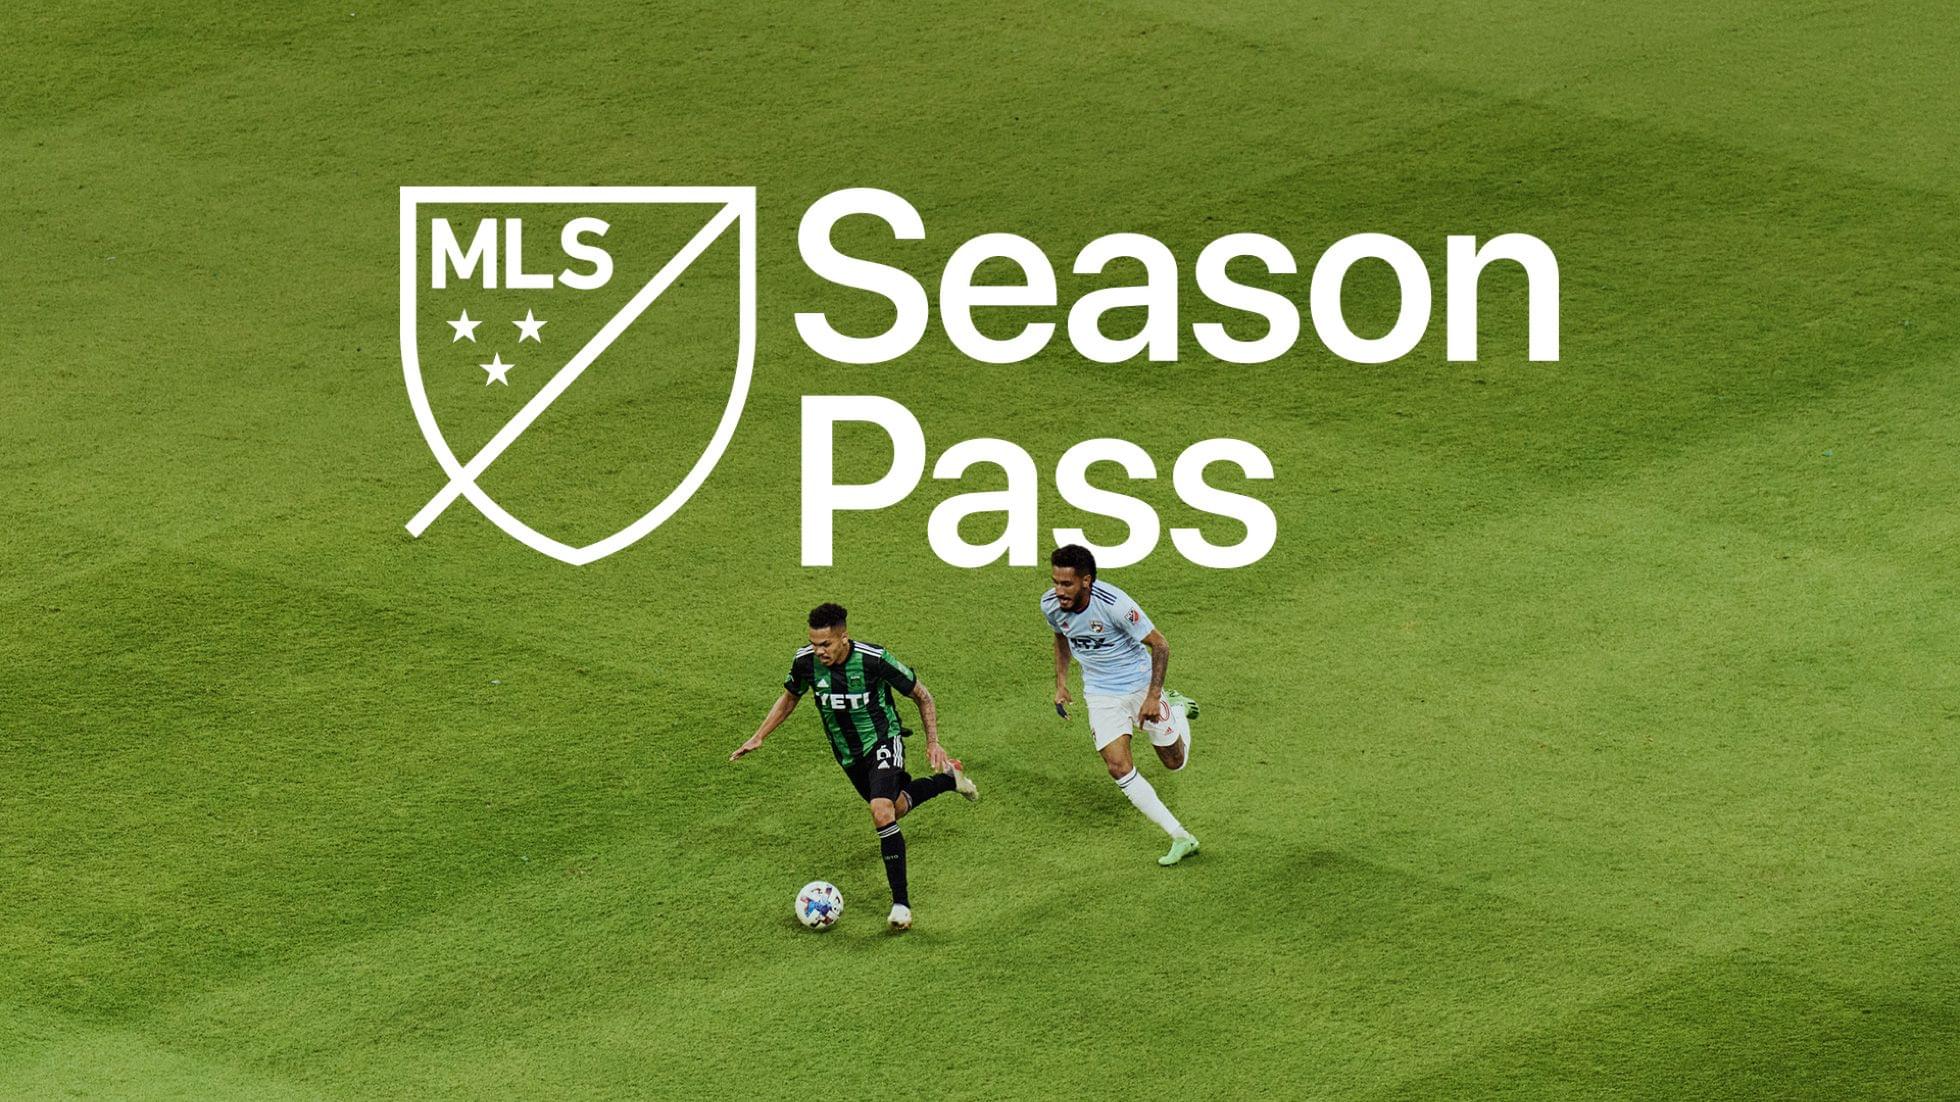 Apple and Major League Soccer Will Launch MLS Season Pass on February 1